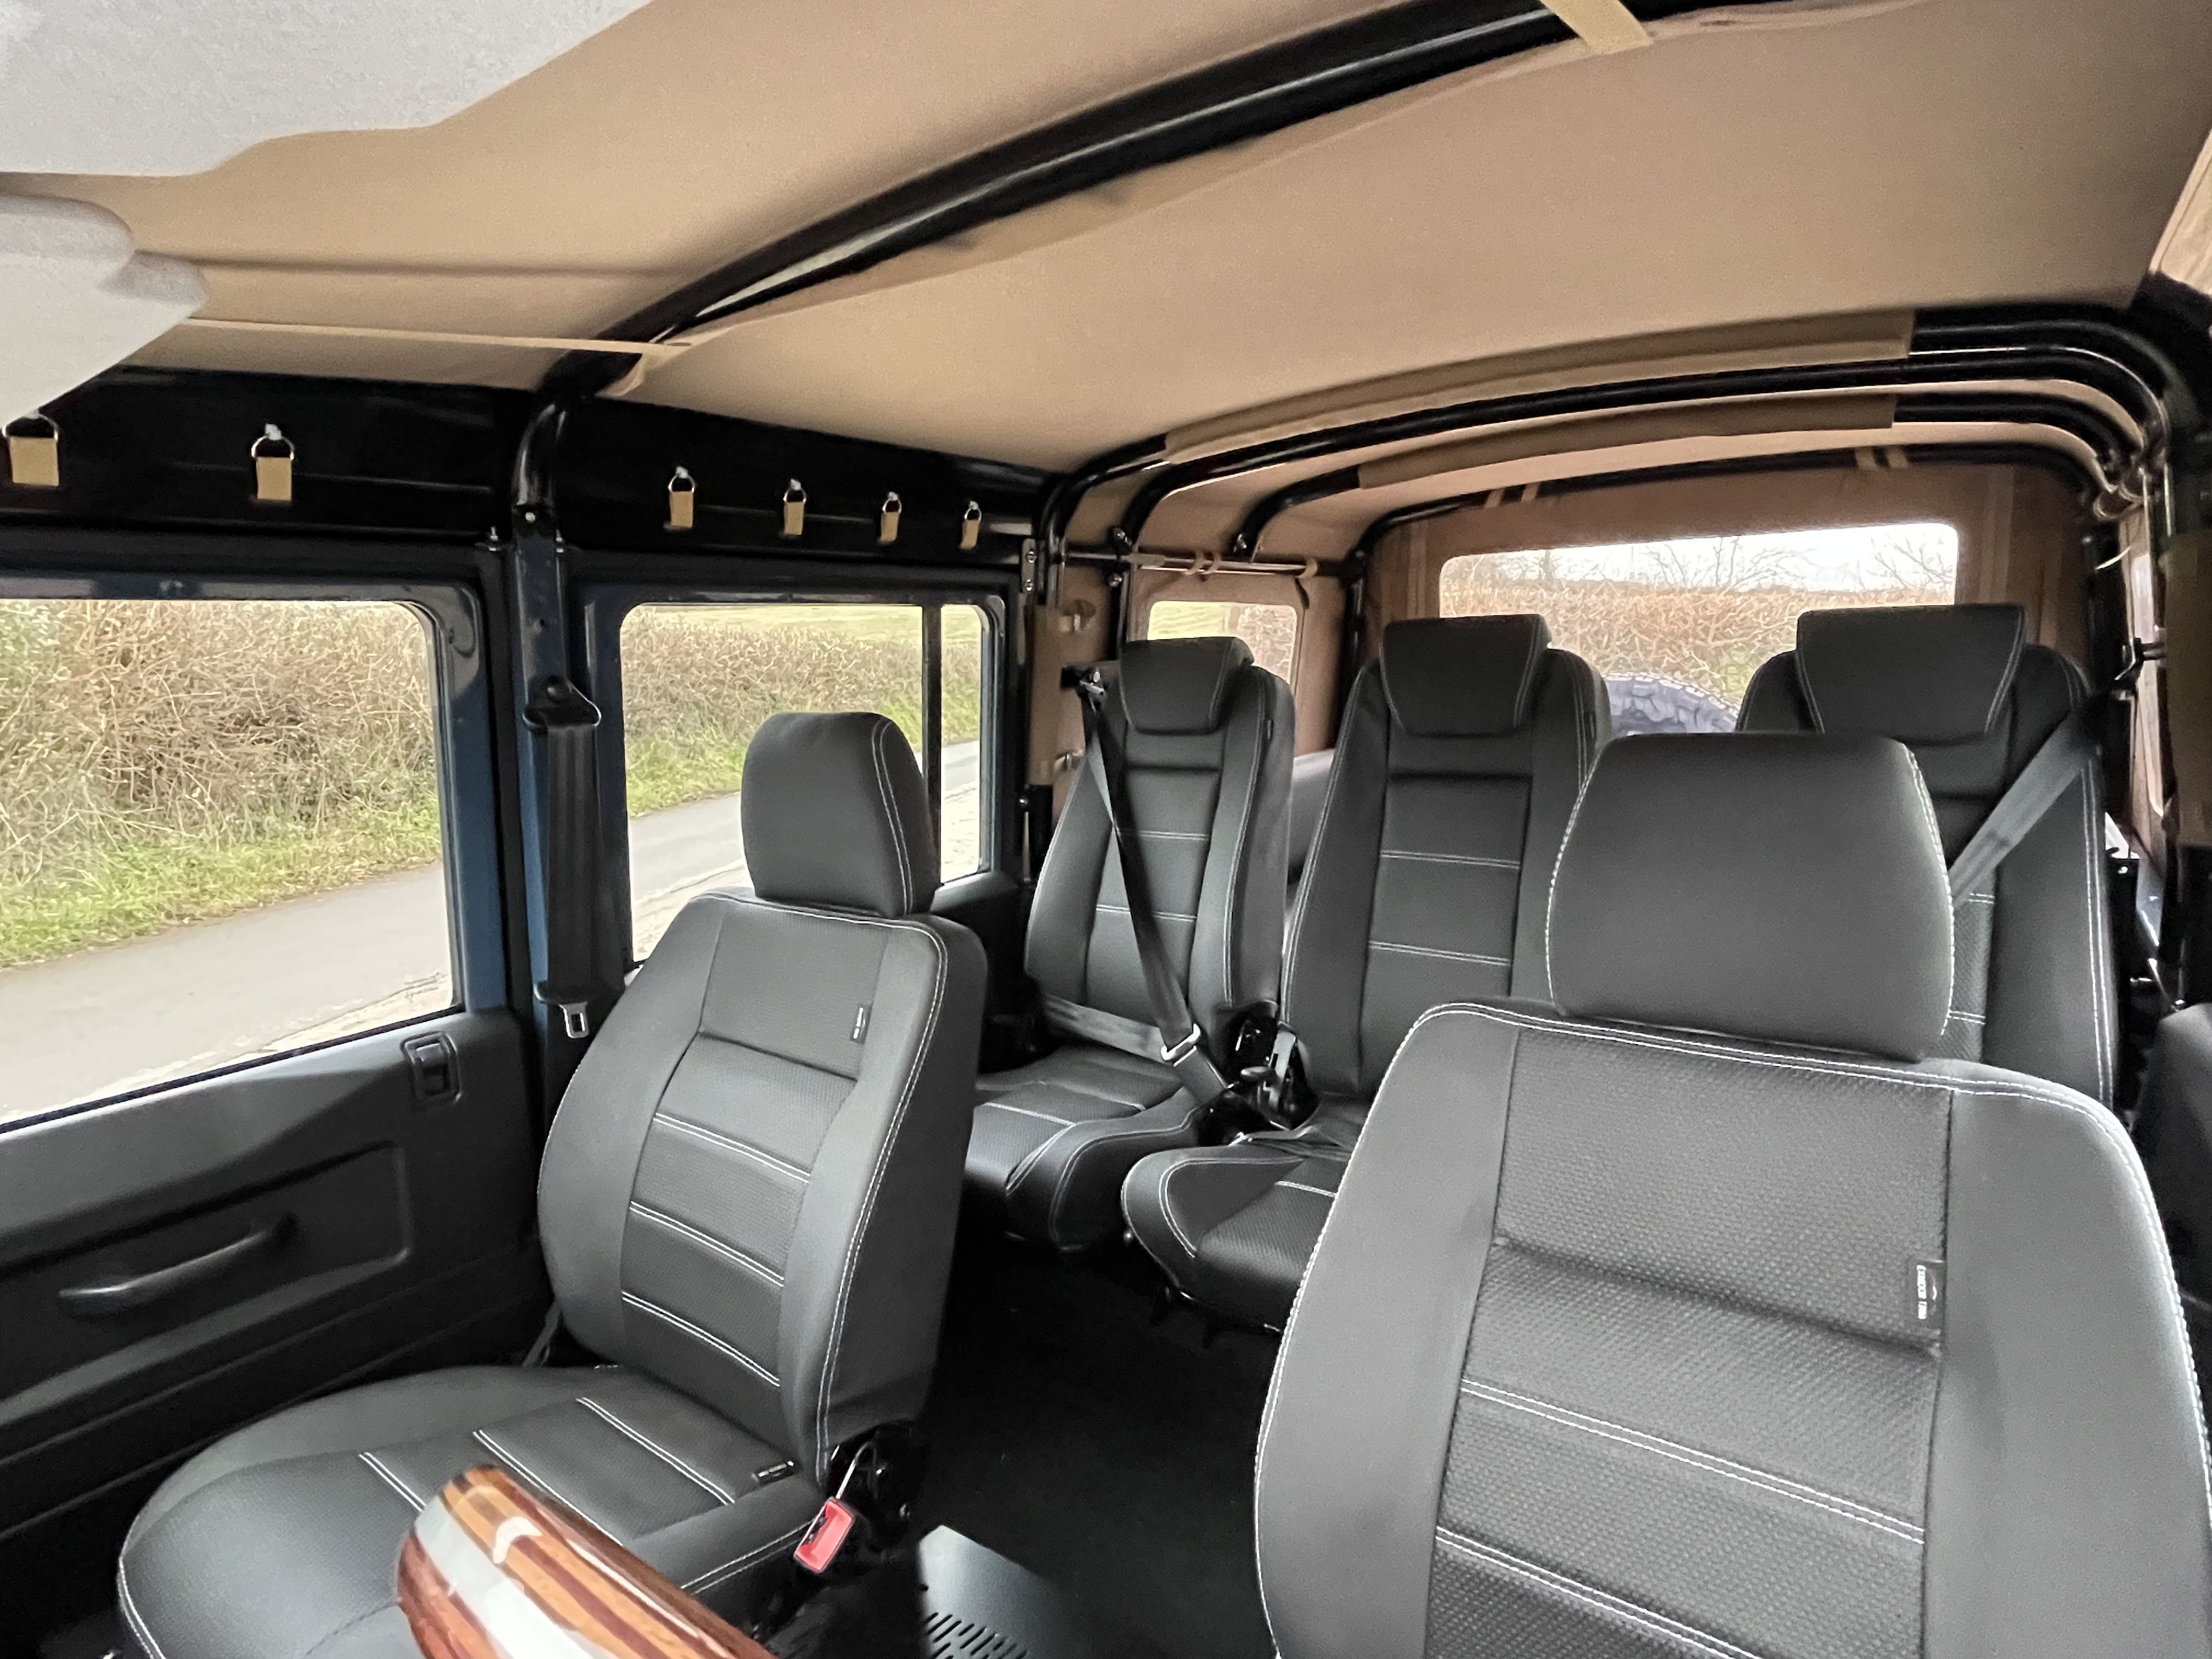 The interior of a vintage Land Rover Defender 110 Soft Top to show how the upgrades can raise the bar for your vehicle.